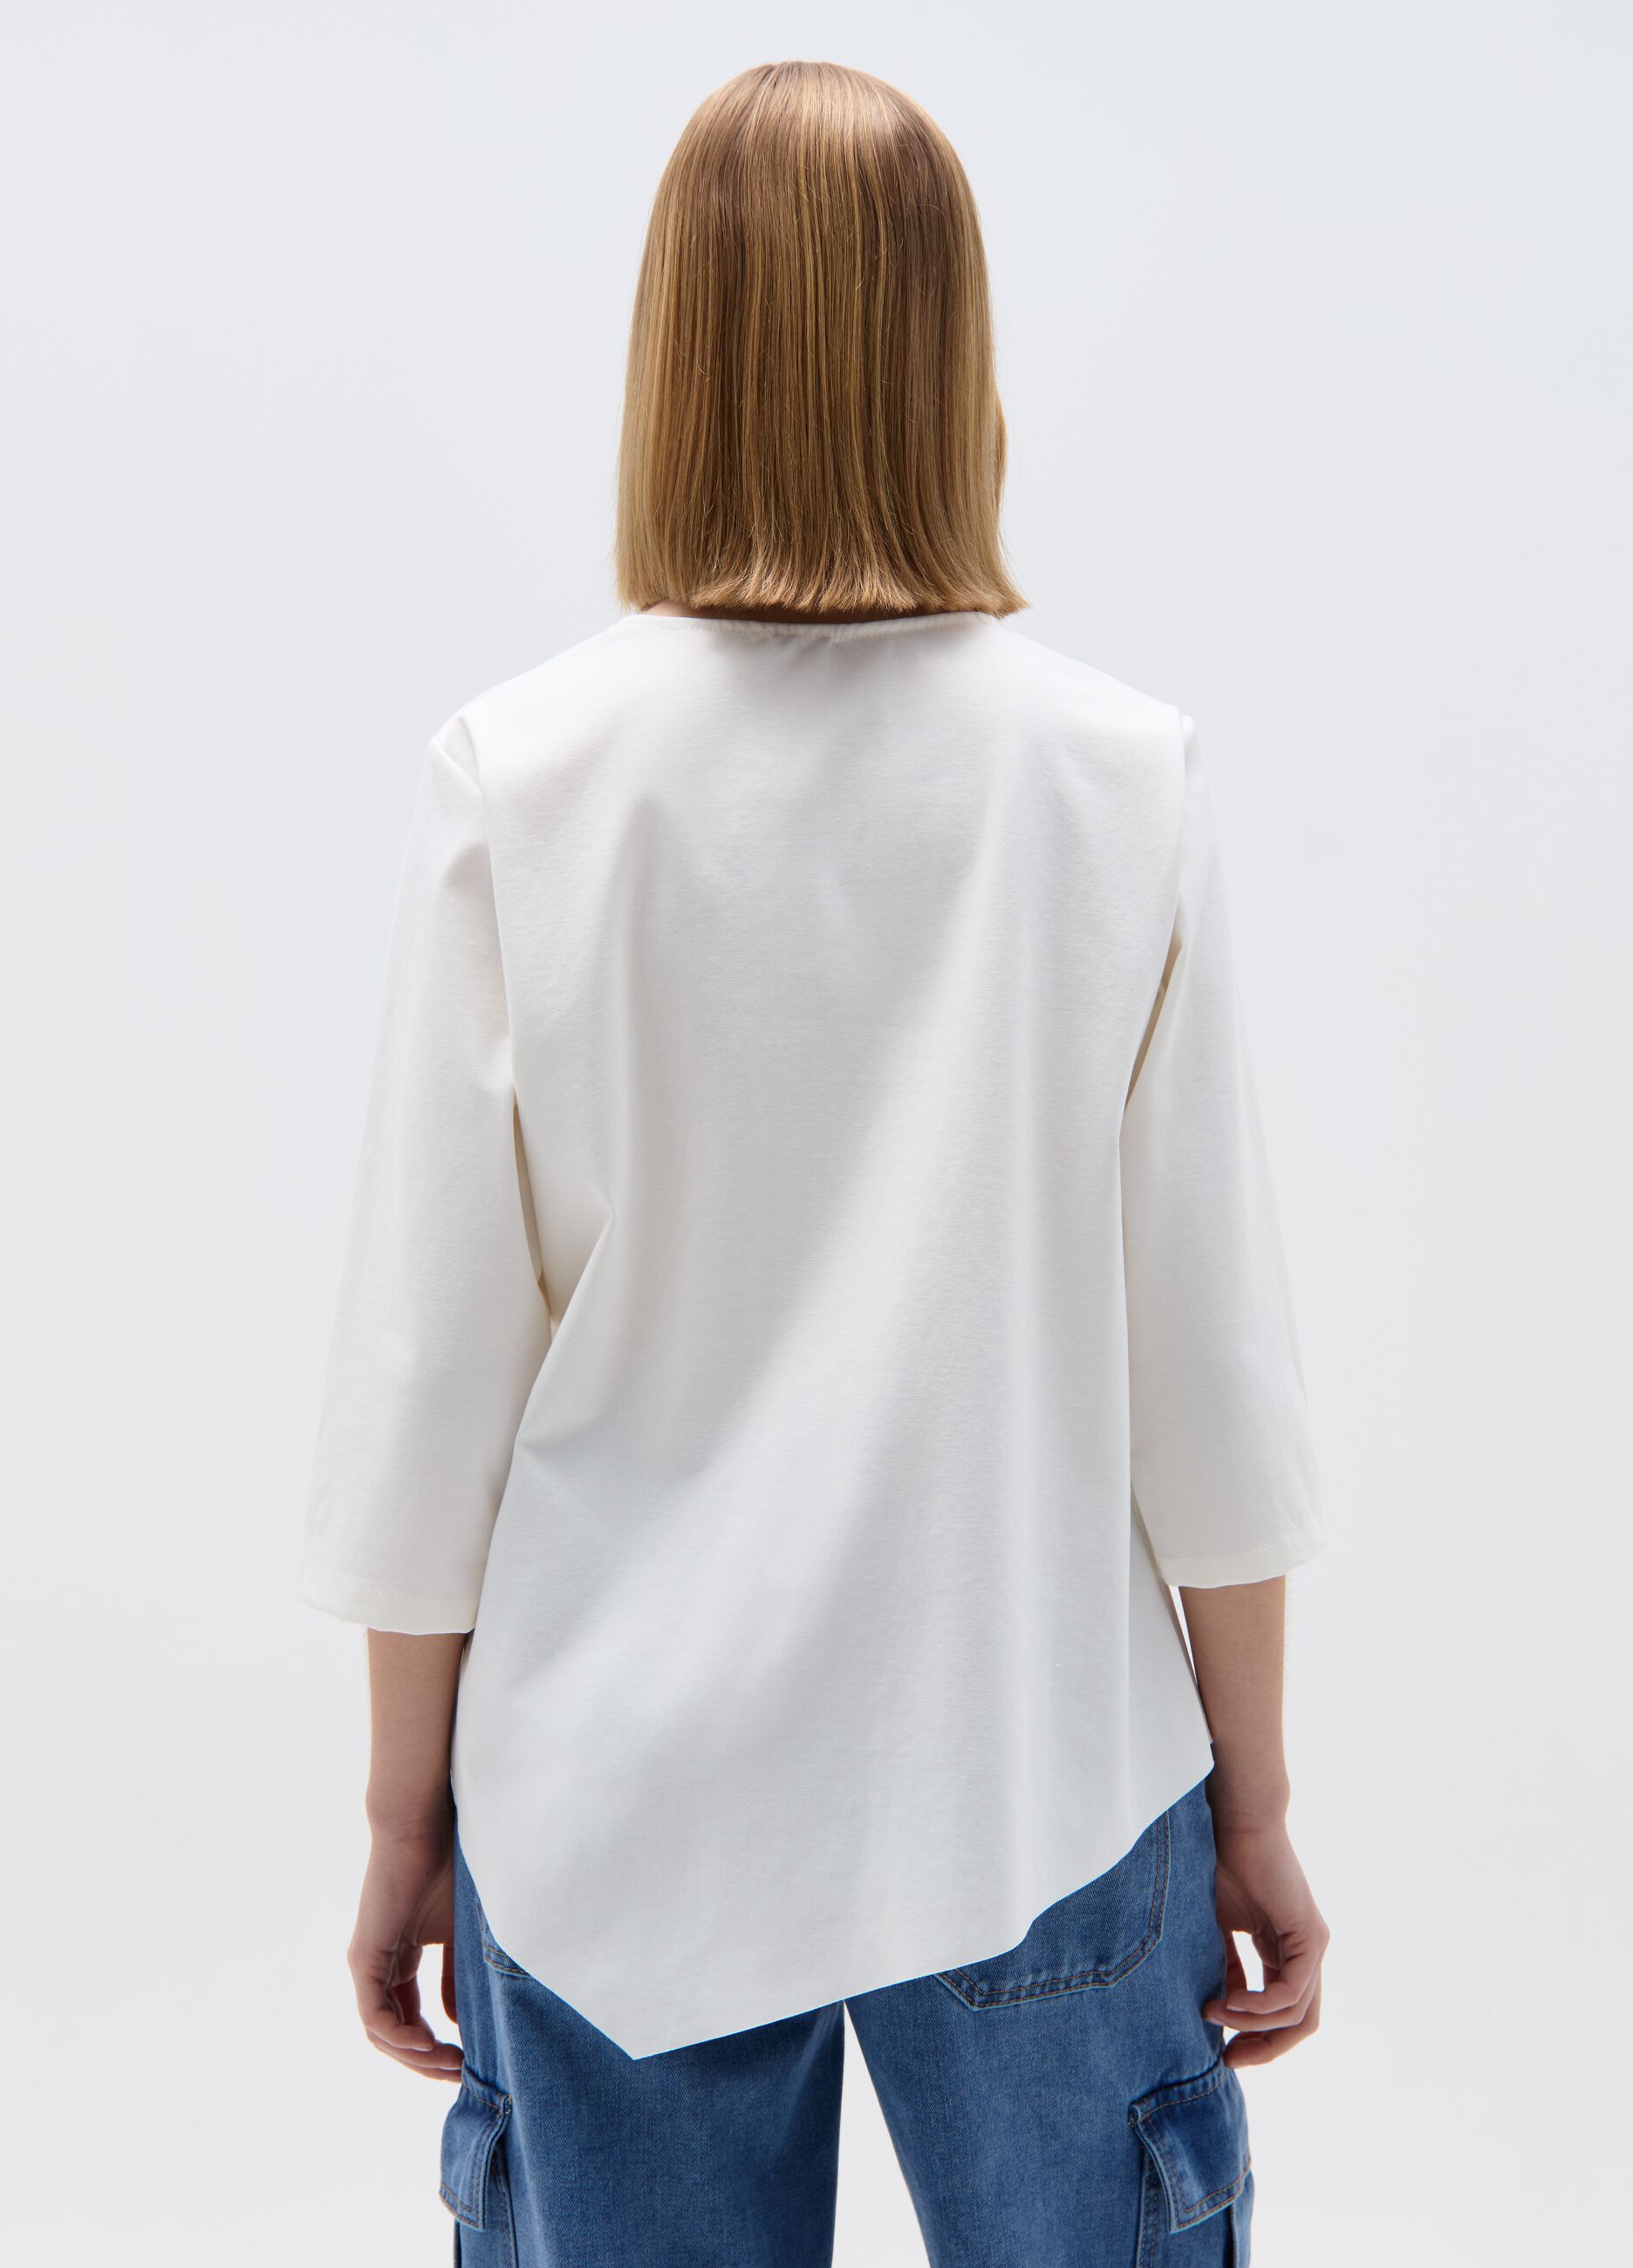 Asymmetric blouse with side bow